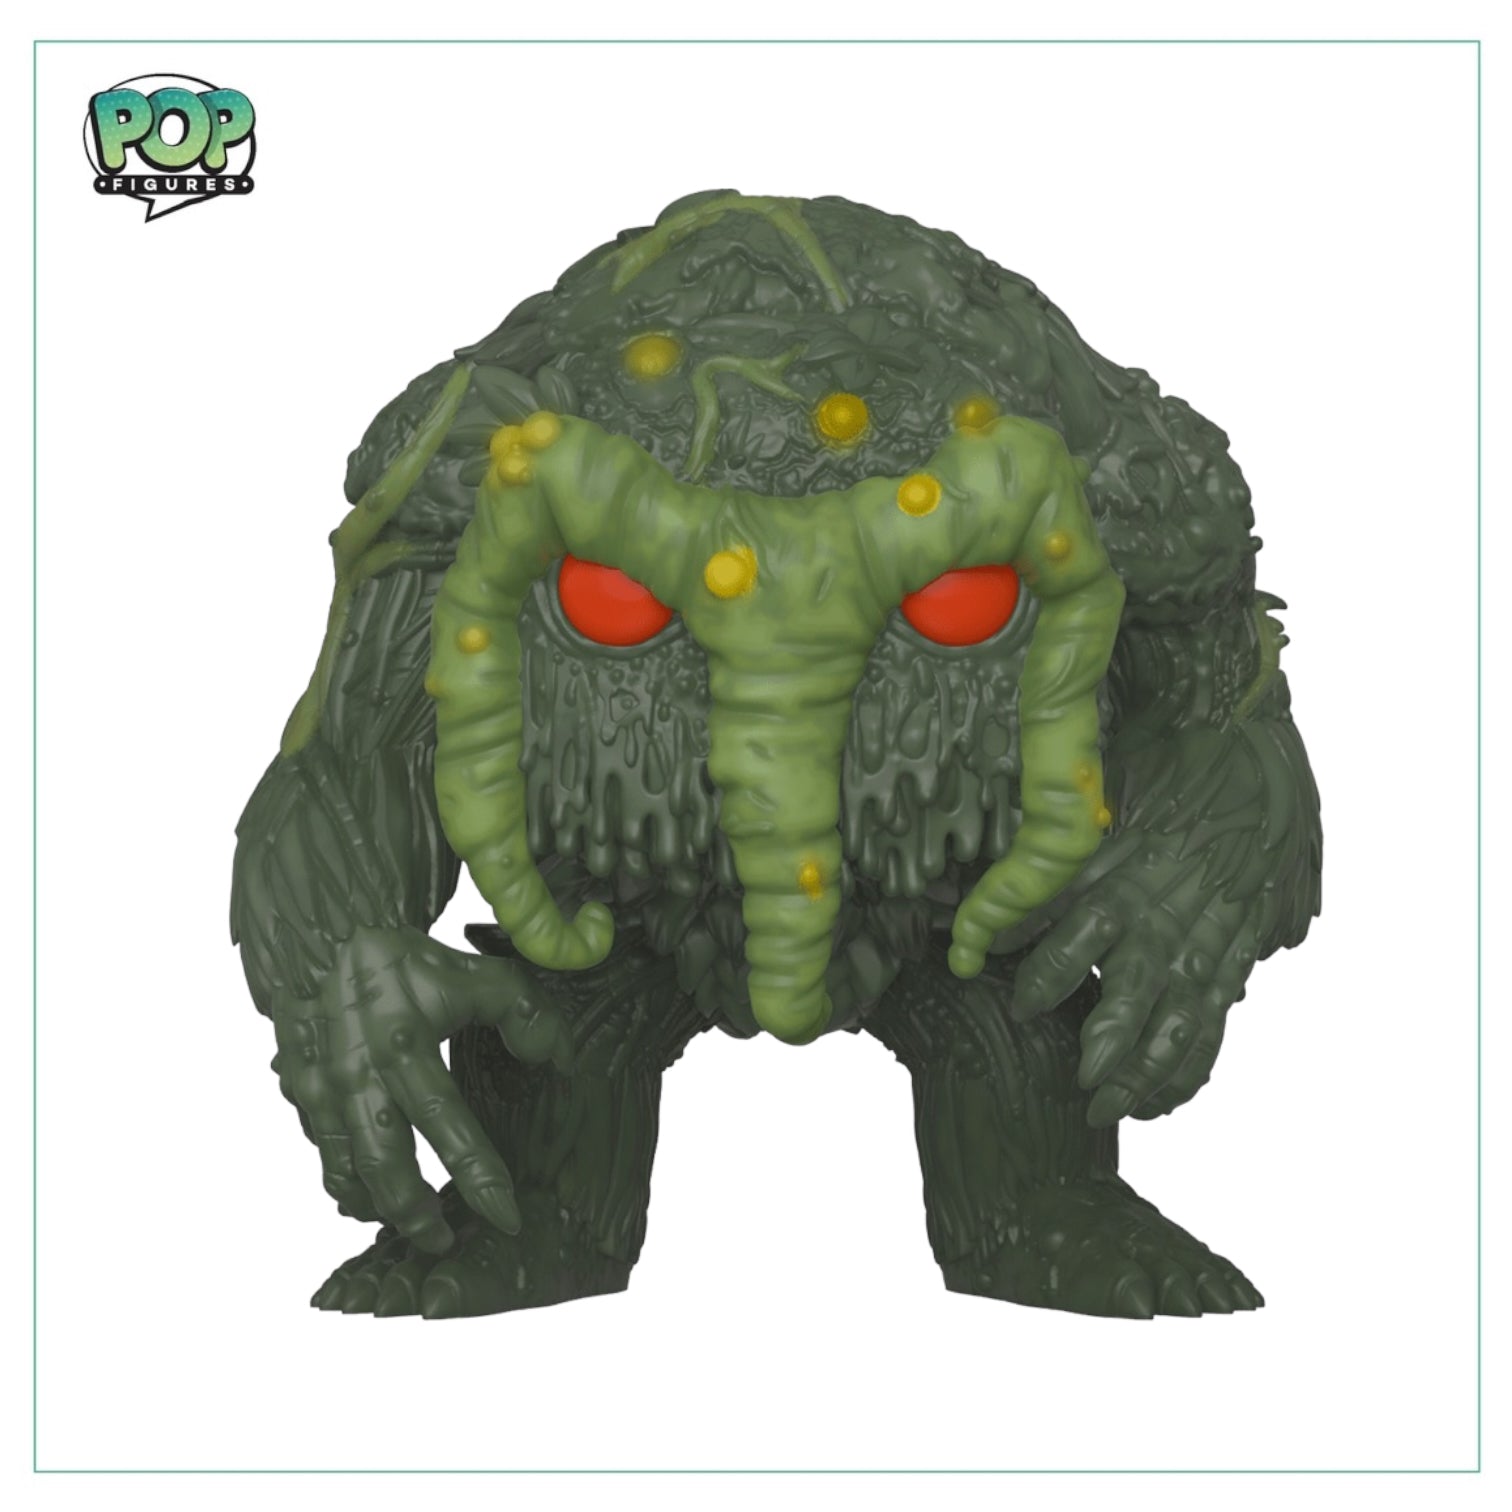 Man-Thing #492 Funko Pop! Marvel, 2019 SDCC Limited Edition Exclusive